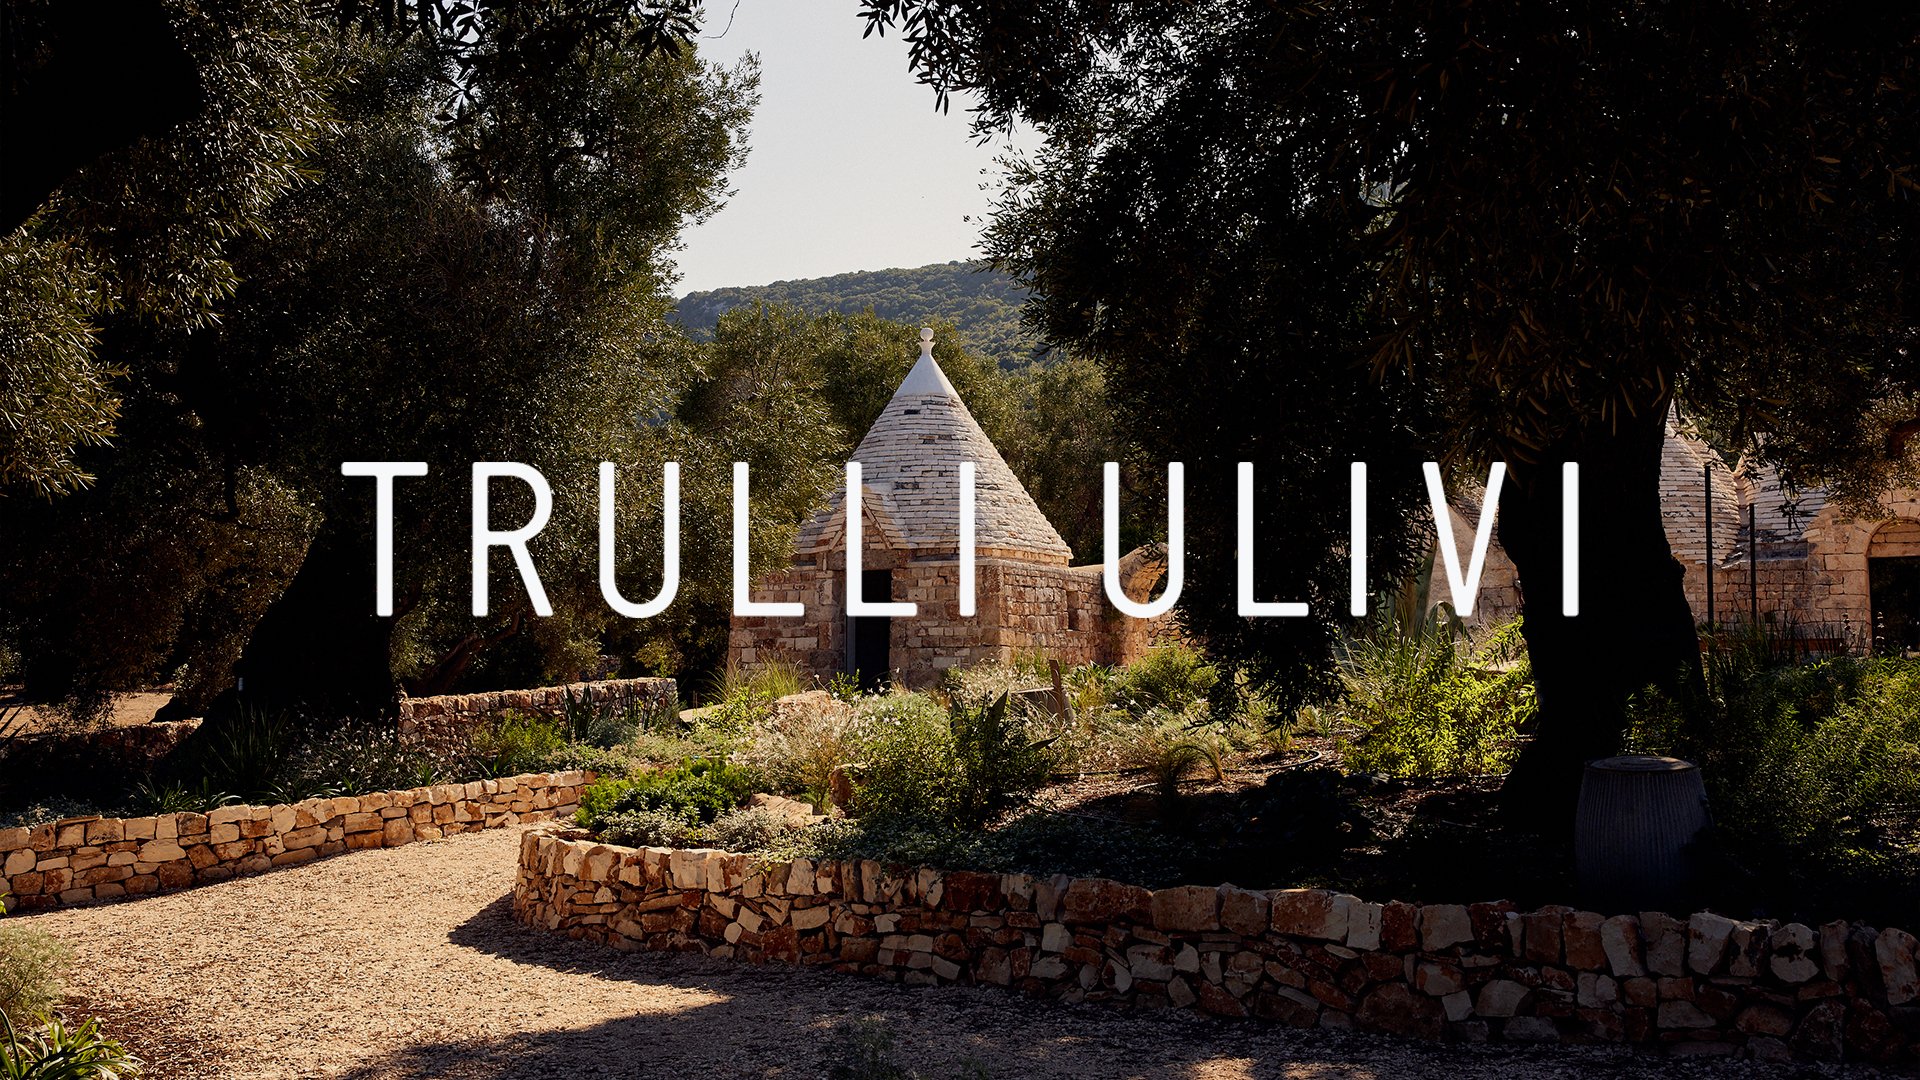 Logotype by Here Design for Italian olive oil producer Trulli Ulivi.